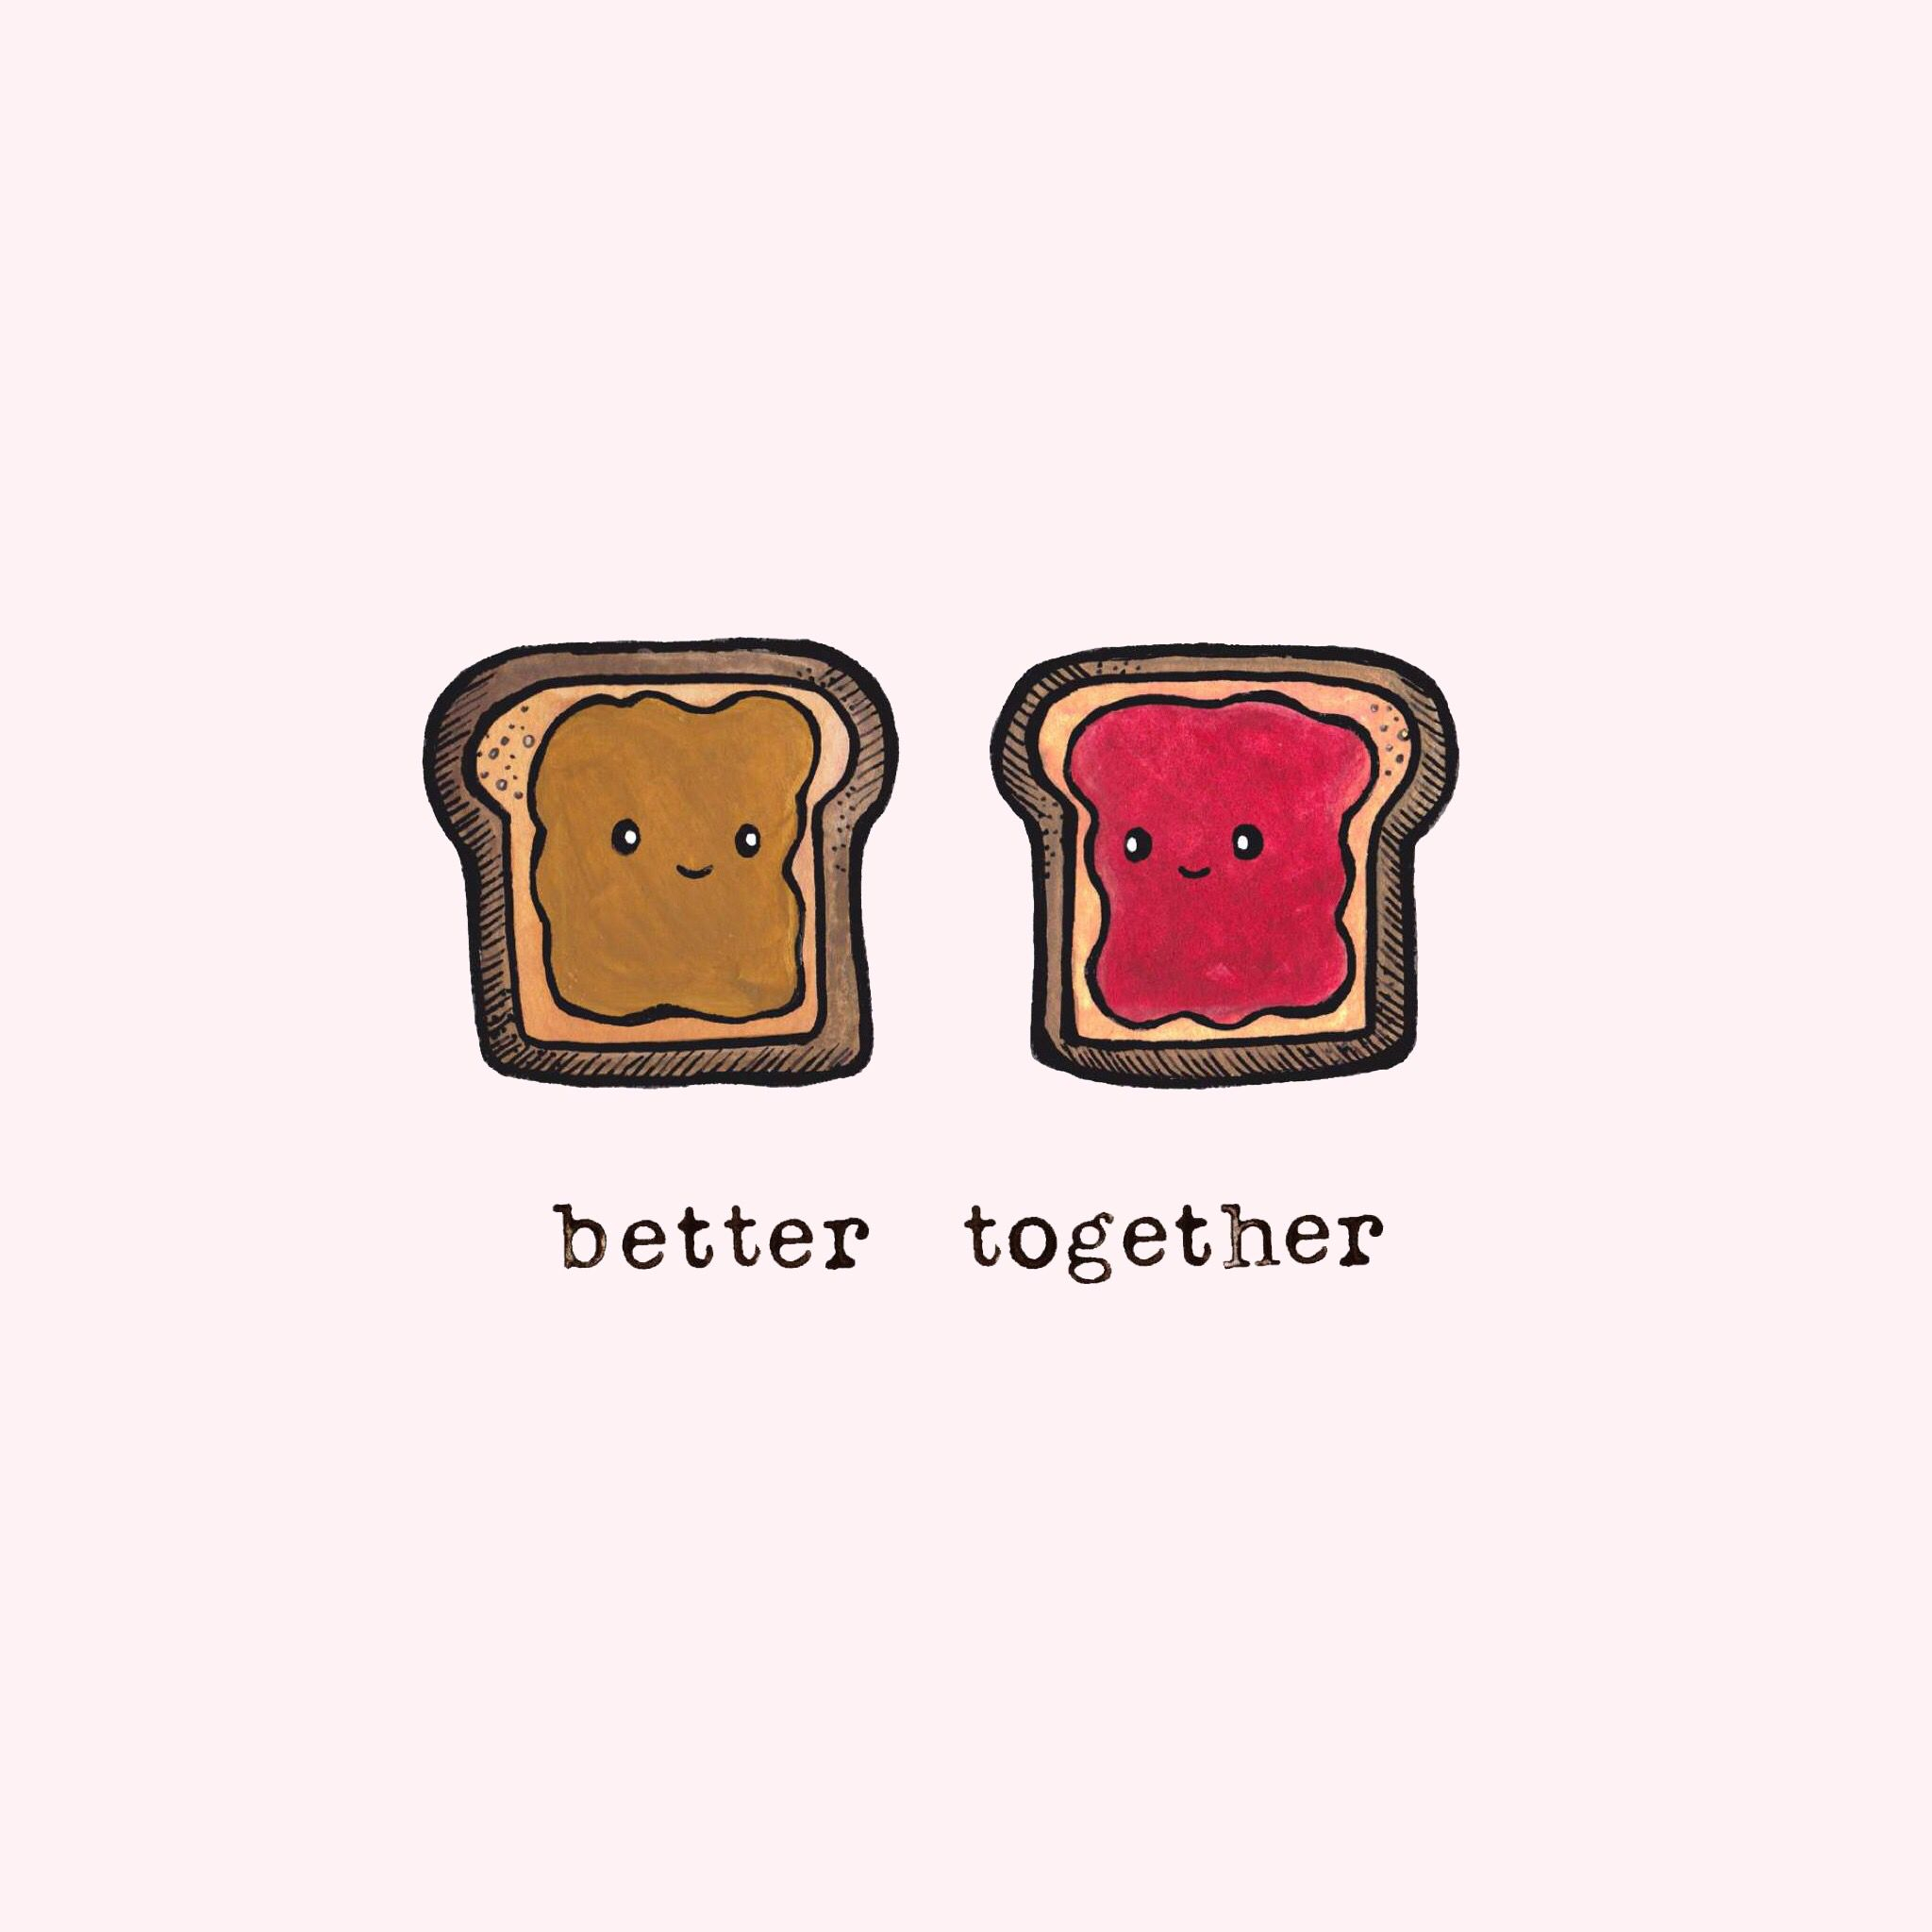 2048x2048 better together peanut butter + jelly | Better together, Cute wallpapers, Cute backgrounds